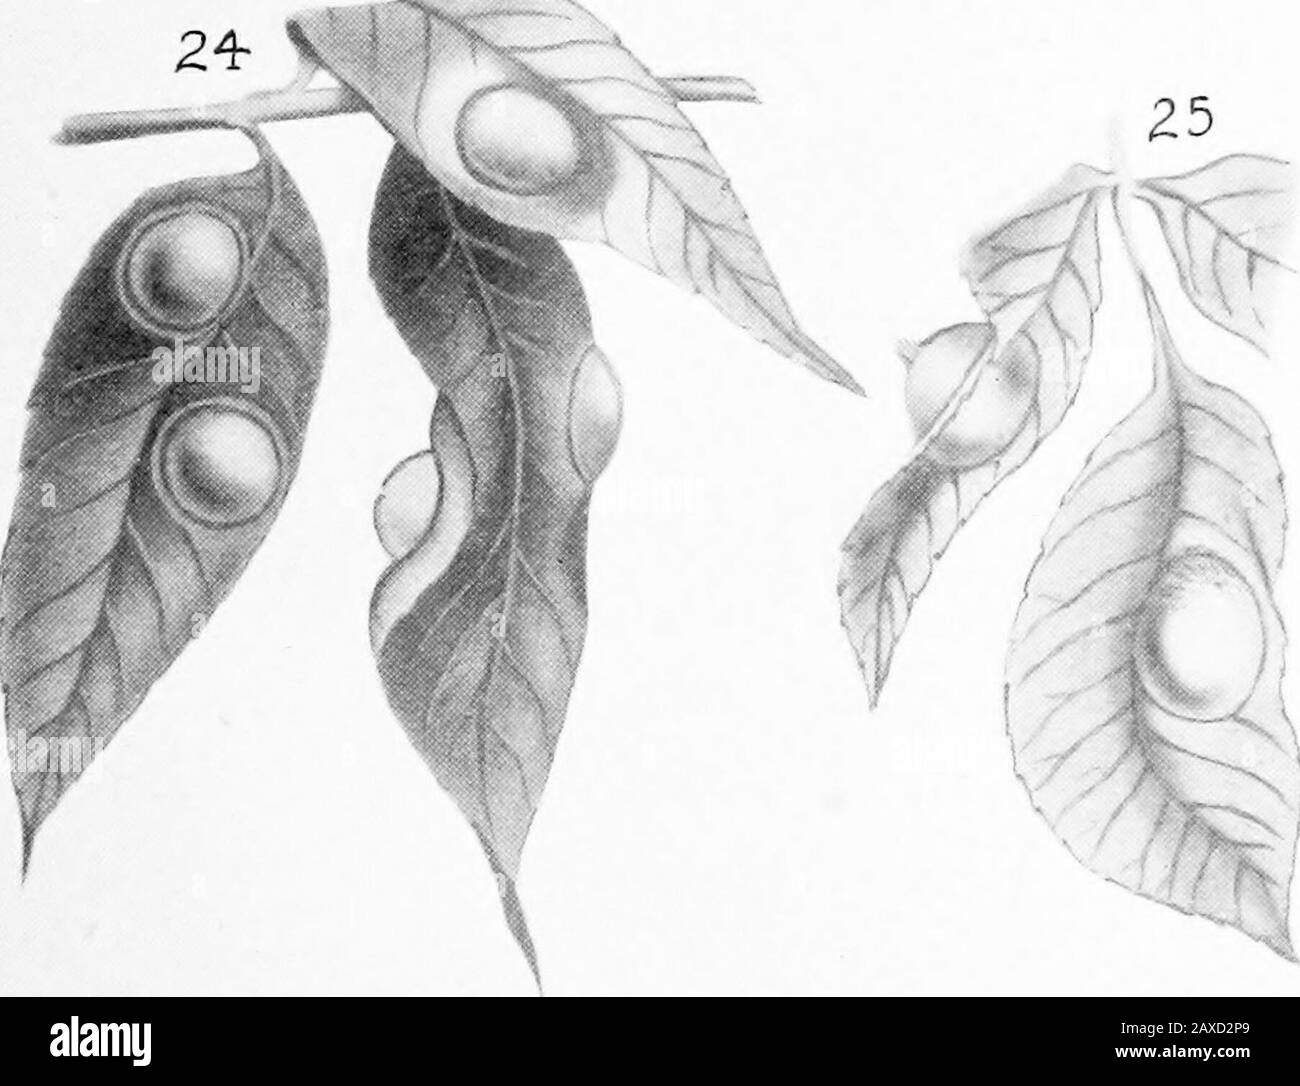 North American Phylloxerinae affecting Hicoria (Carya) and other trees . •». PLATE V. Phylloxera conica (Shimer). Fig. 26. Young galls, above and beneath—natural size. Fig. 27. Young gall, vertical section—enlarged. Fig. 28. Mature galls, above and beneath—natural size. Fig. 29. Mature galls, variety ; above and beneath—natural size. Phylloxera c.-avellana Riley. Fig. 30. Young galls, above and beneath—natural size.Fig. 31. Mature galls, above and beneath—natural size. PLATE V Stock Photo